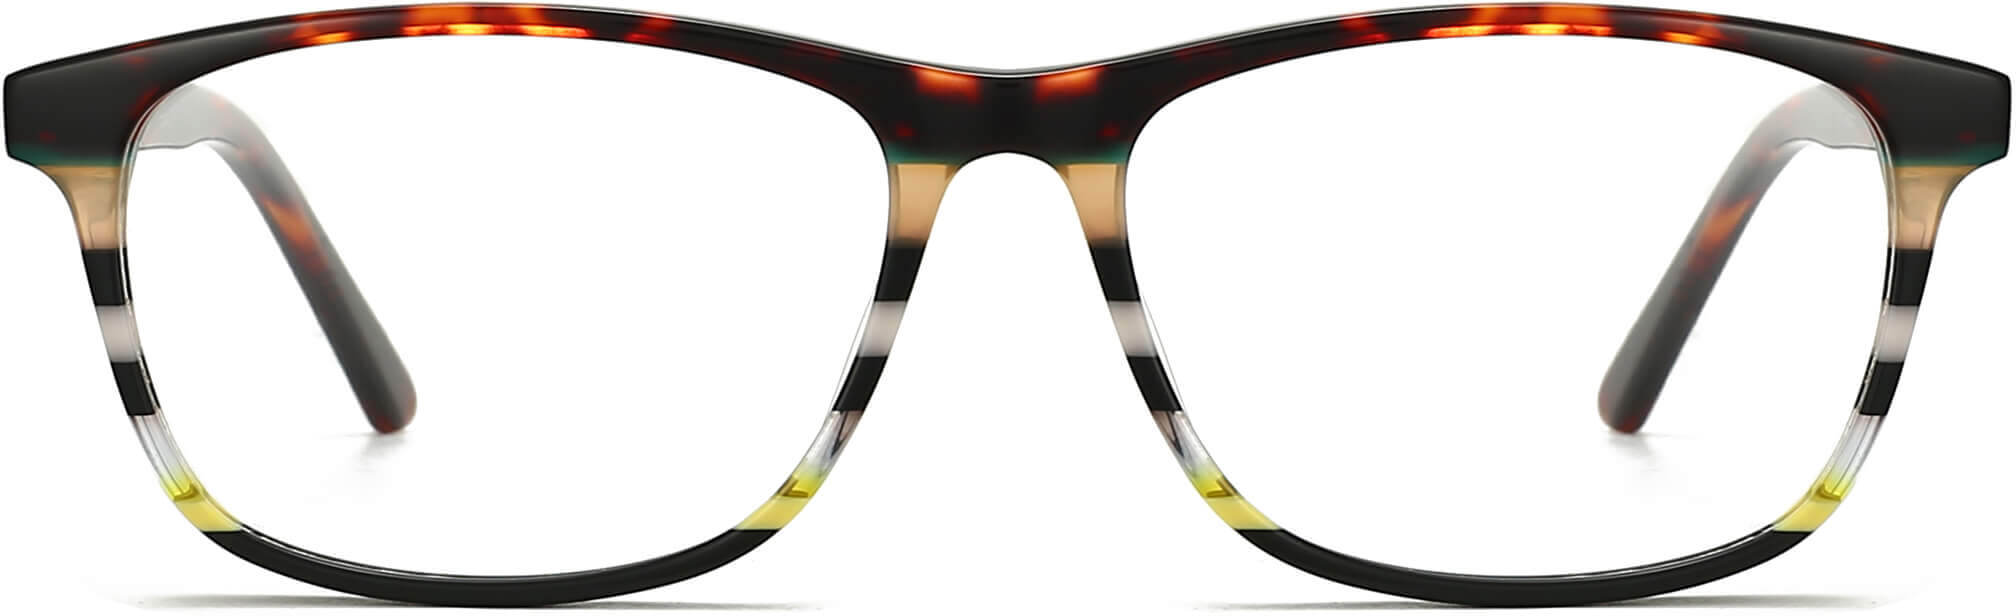 griffin acetate rectangle red tortoise Eyeglasses from ANRRI, front view